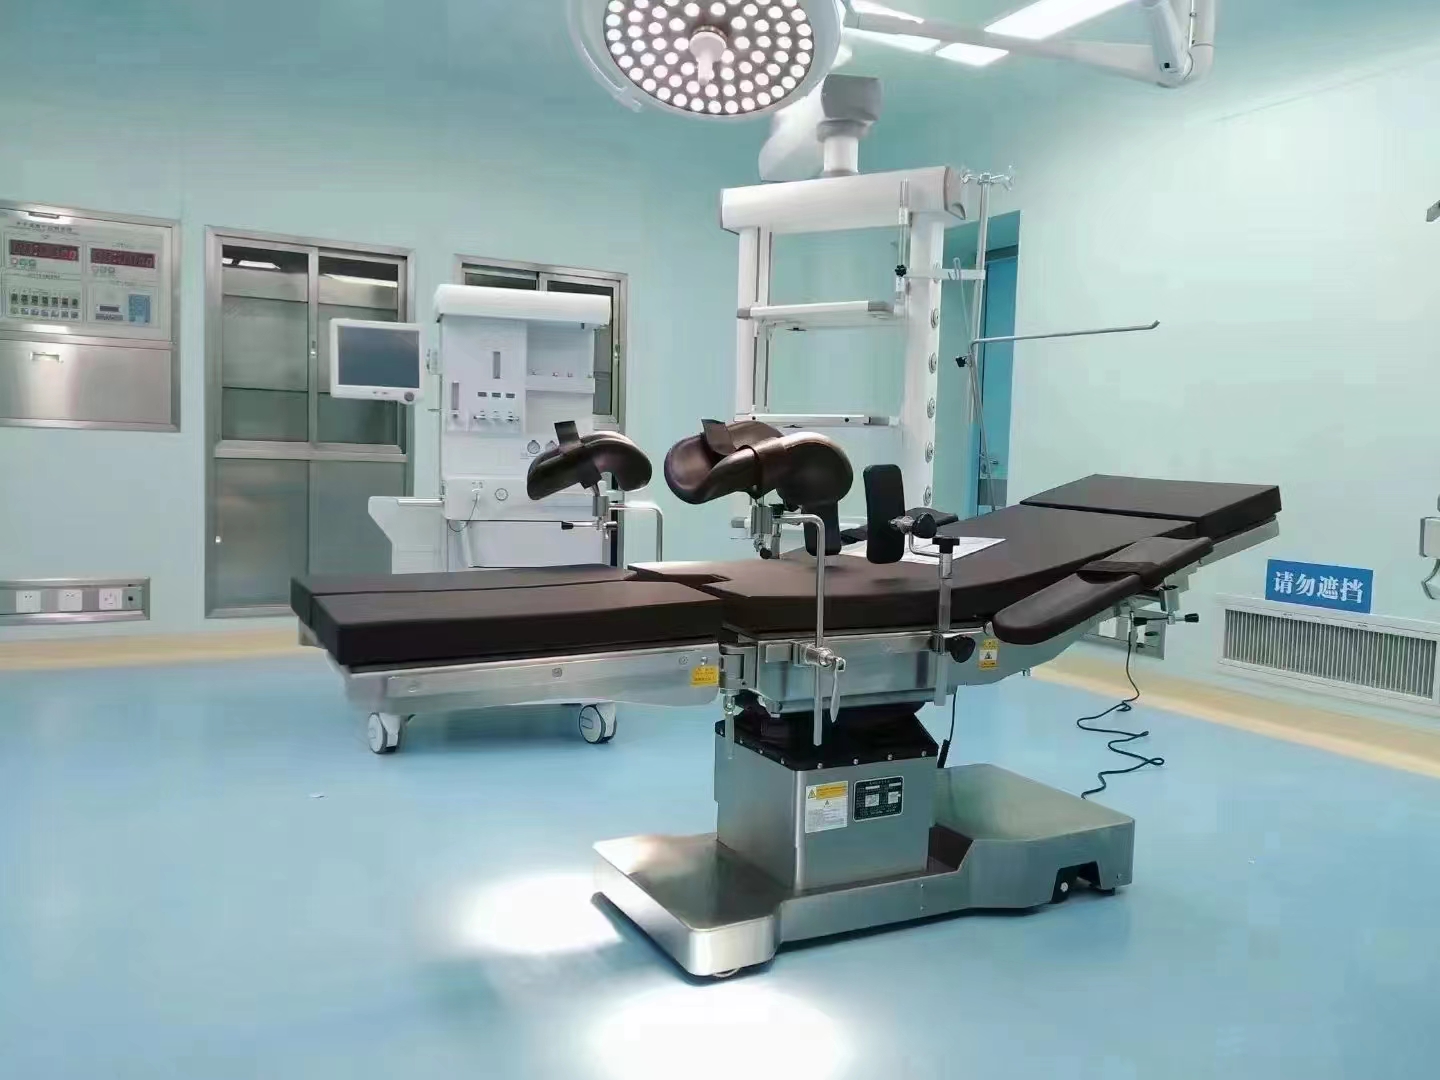 A bed used in hospital operating rooms